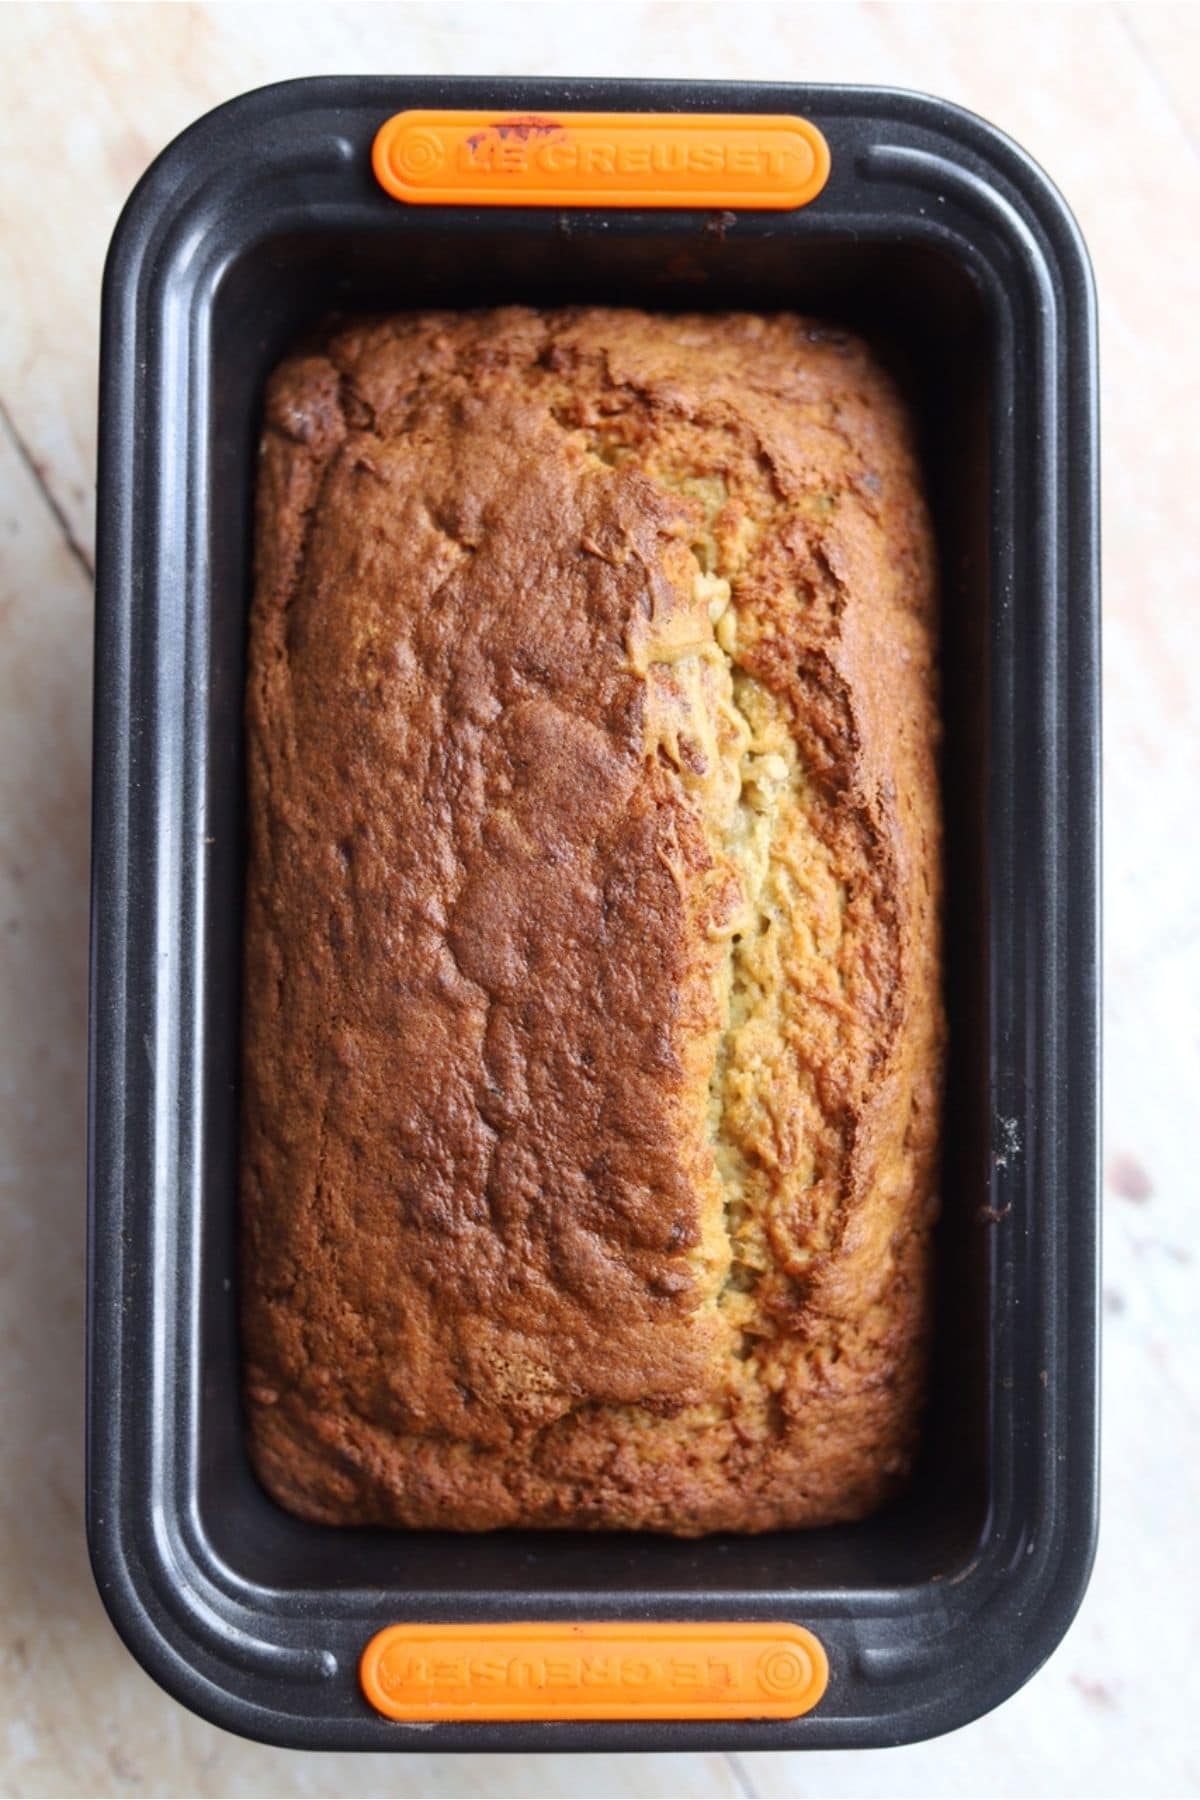 Baked banana bread in a loaf pan